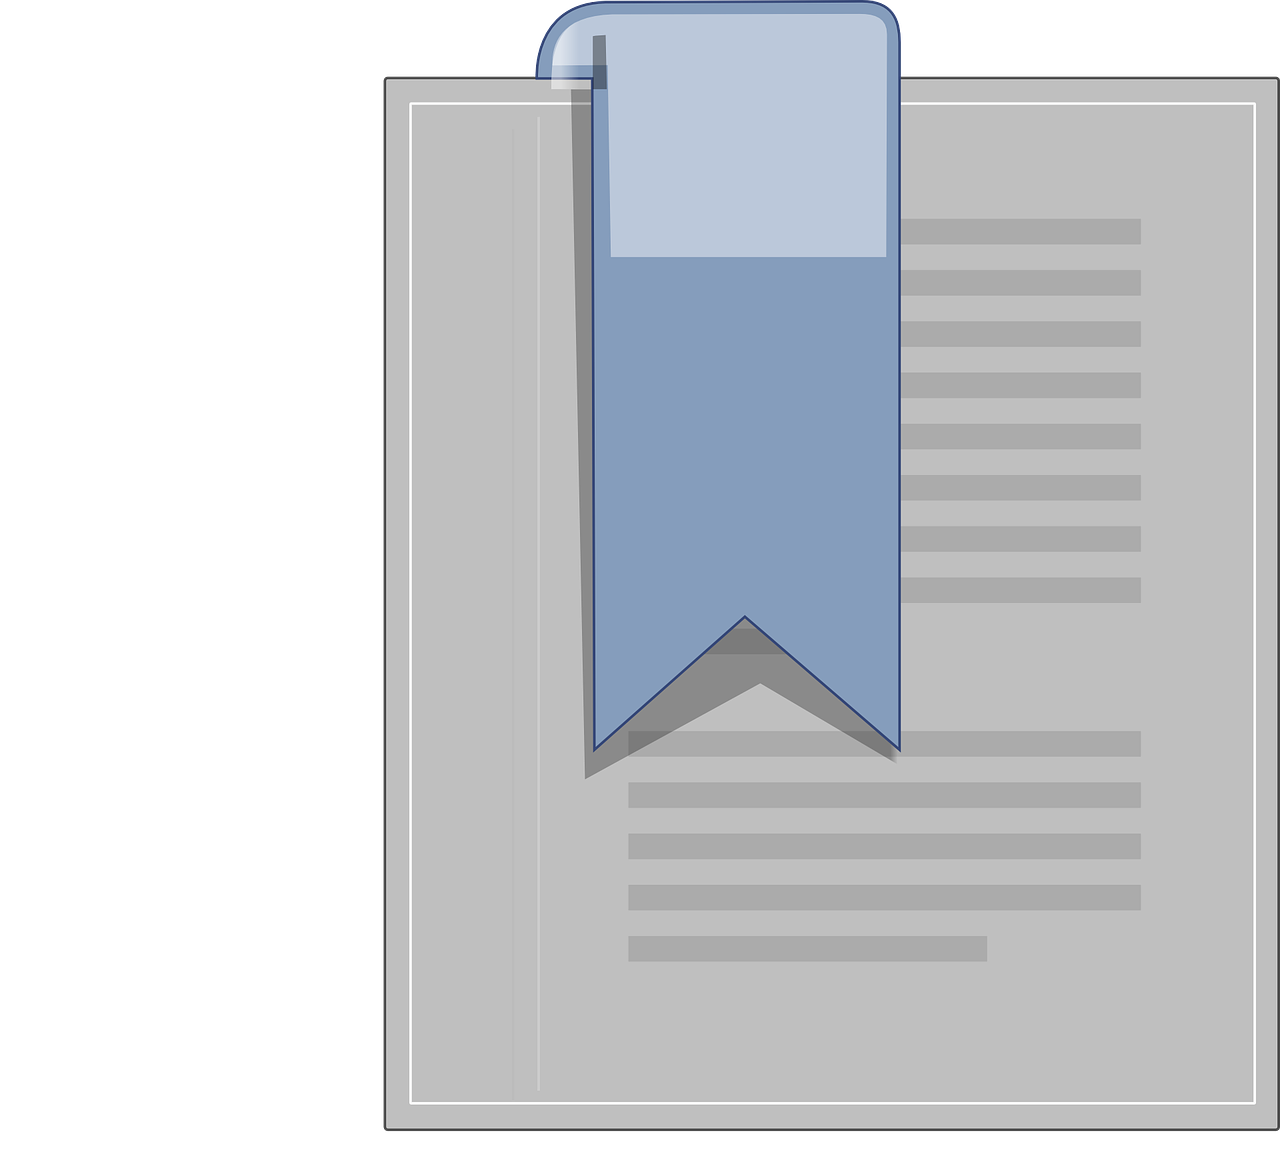 a blue bookmark sitting on top of a piece of paper, a screenshot, by Dan Content, pixabay contest winner, conceptual art, gray, encyclopedia illustration, dark. no text, flag